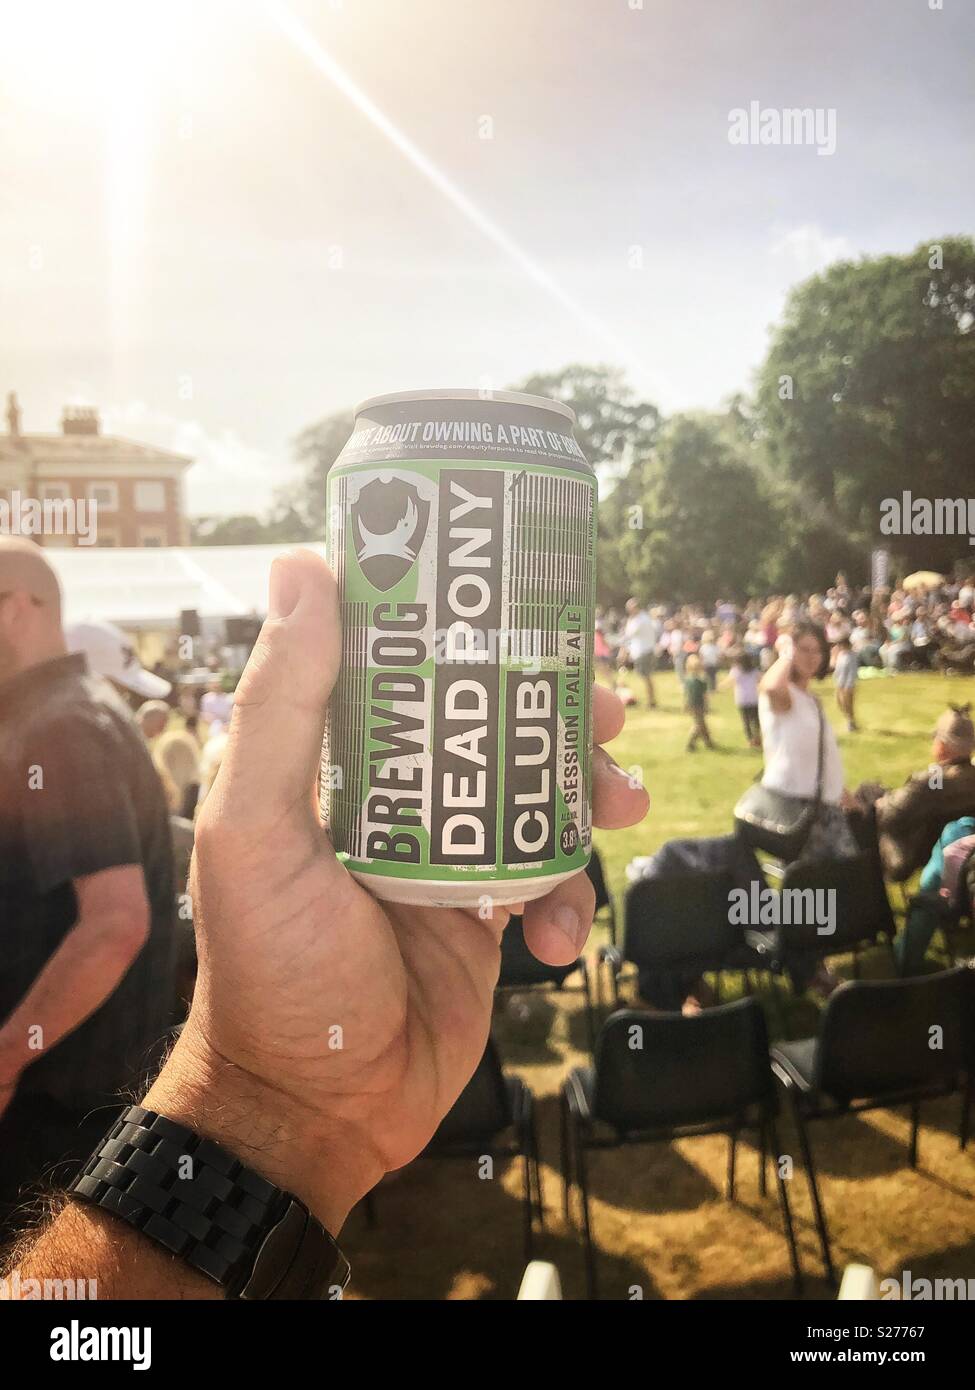 Brewdog’s dead pony club can of beer, enjoyed at a festival. Credit: Lee Ramsden / Alamy Stock Photo